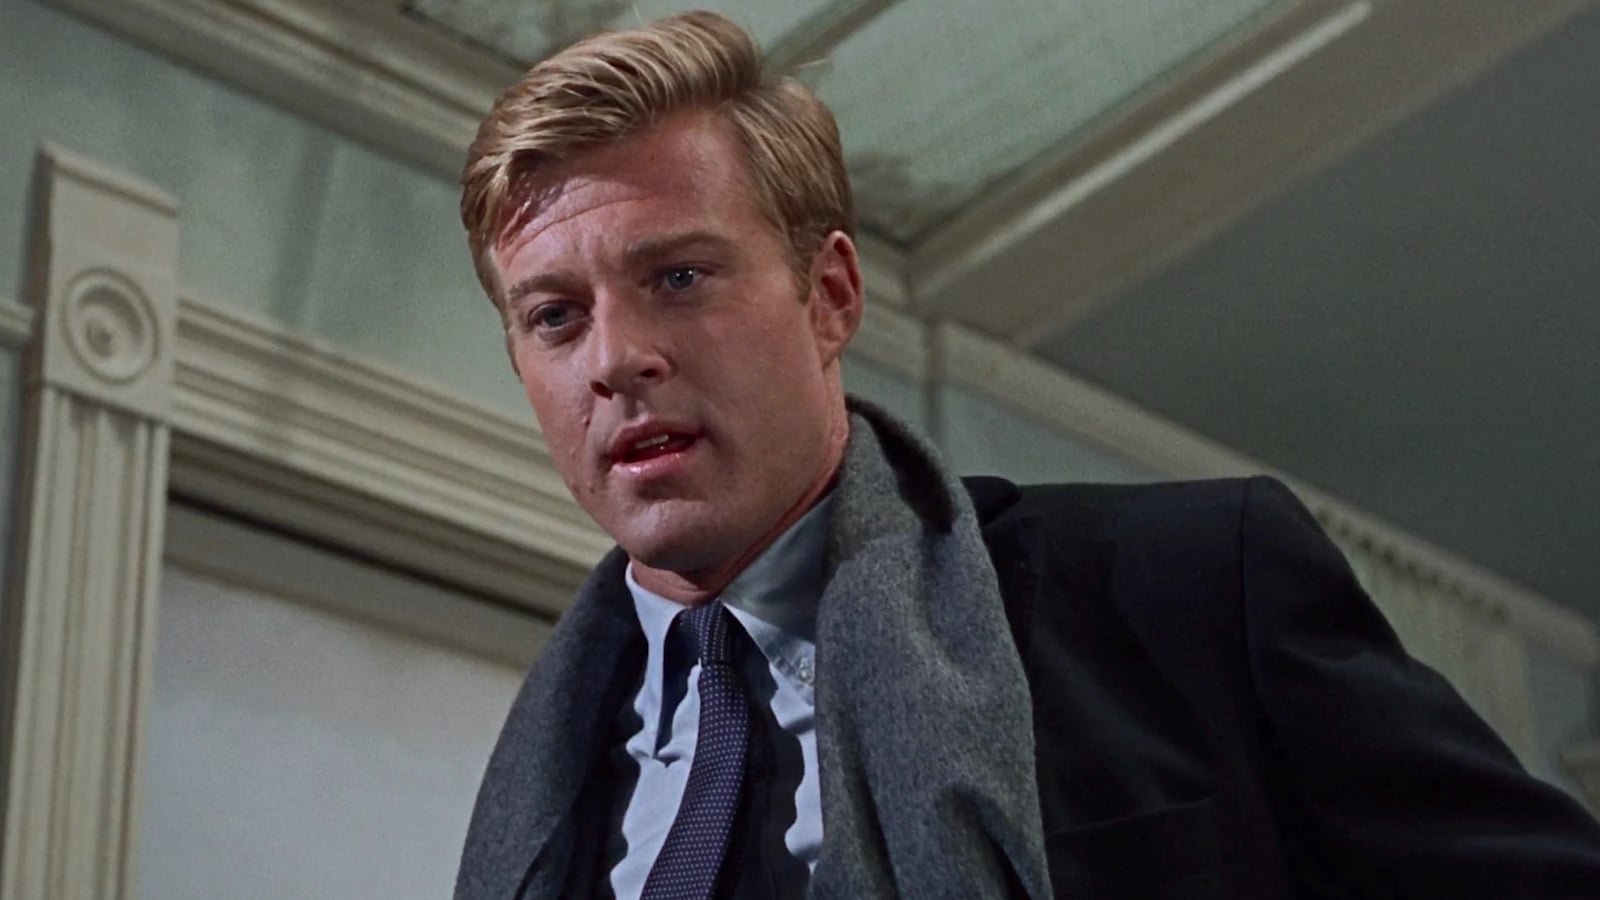 <p>Redford’s early work certainly had its love plots, but he didn’t become a romantic lead until Neil Simon’s <em>Barefoot in the Park</em>. As a conservative lawyer who marries a free-spirited woman, played by Jane Fonda, Redford gets to play the fuddy-duddy and foil. But even when he’s a stick-in-the-mud, Redford has enough charisma to make viewers side with him. This ability to attract and frustrate viewers will serve Redford well during his heyday in the 1970s.</p>